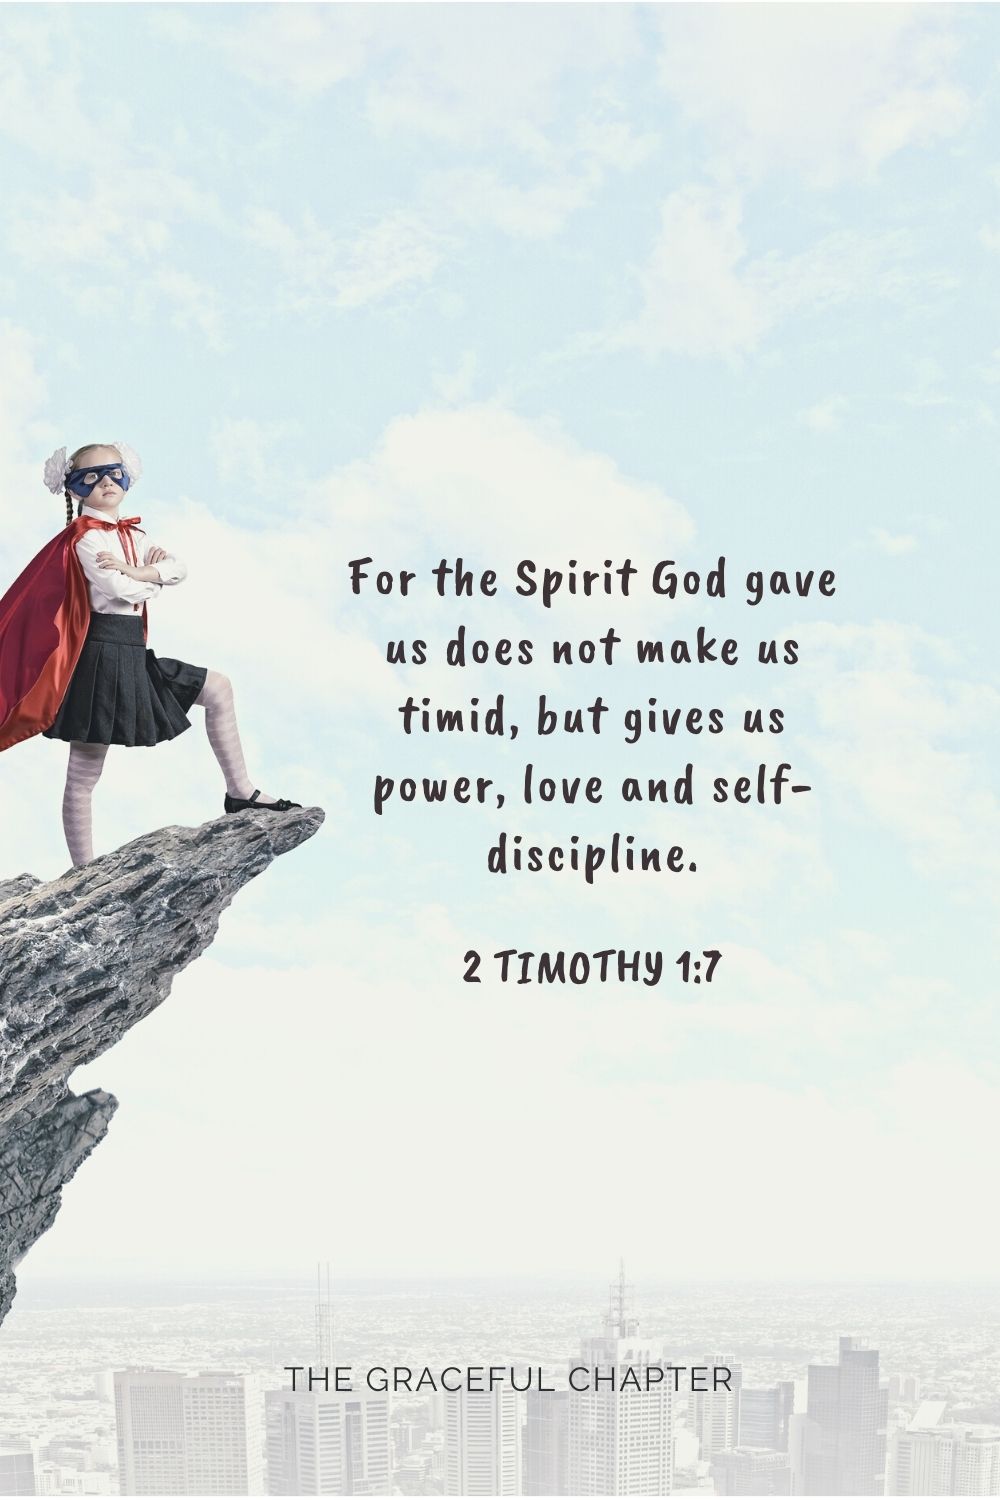 For the Spirit God gave us does not make us timid, but gives us power, love and self-discipline. 2 Timothy 1:7